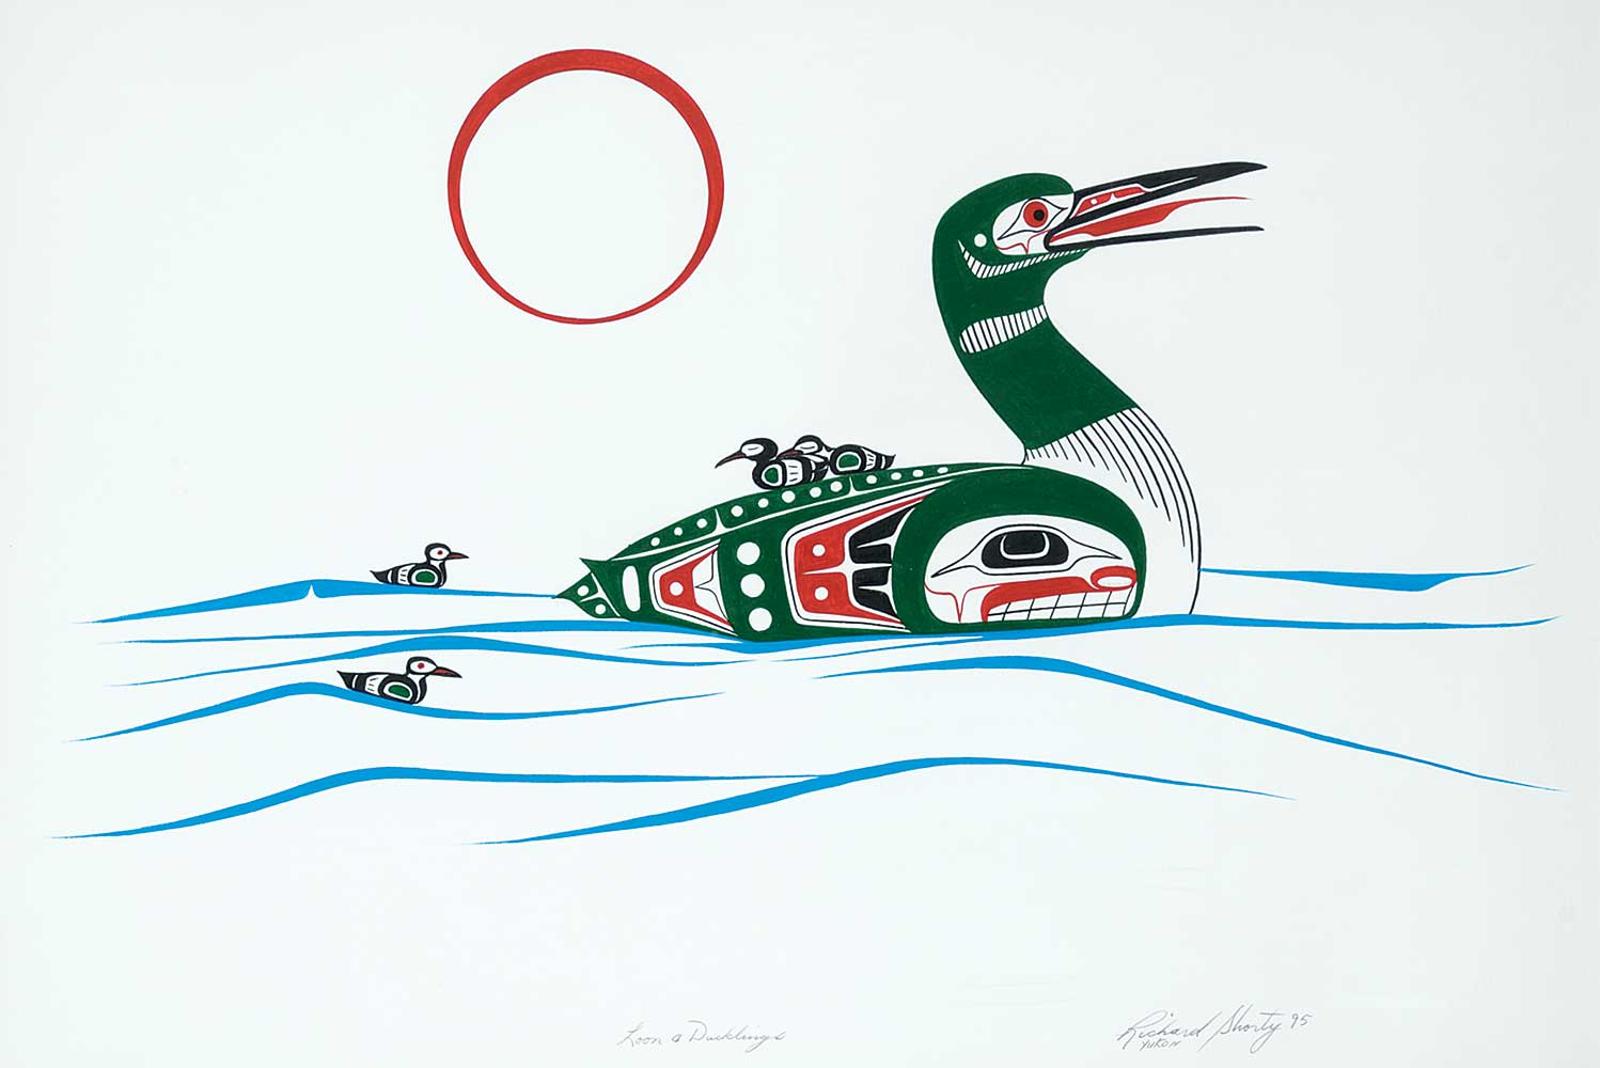 Richard Shorty (1959) - Loon and Ducklings